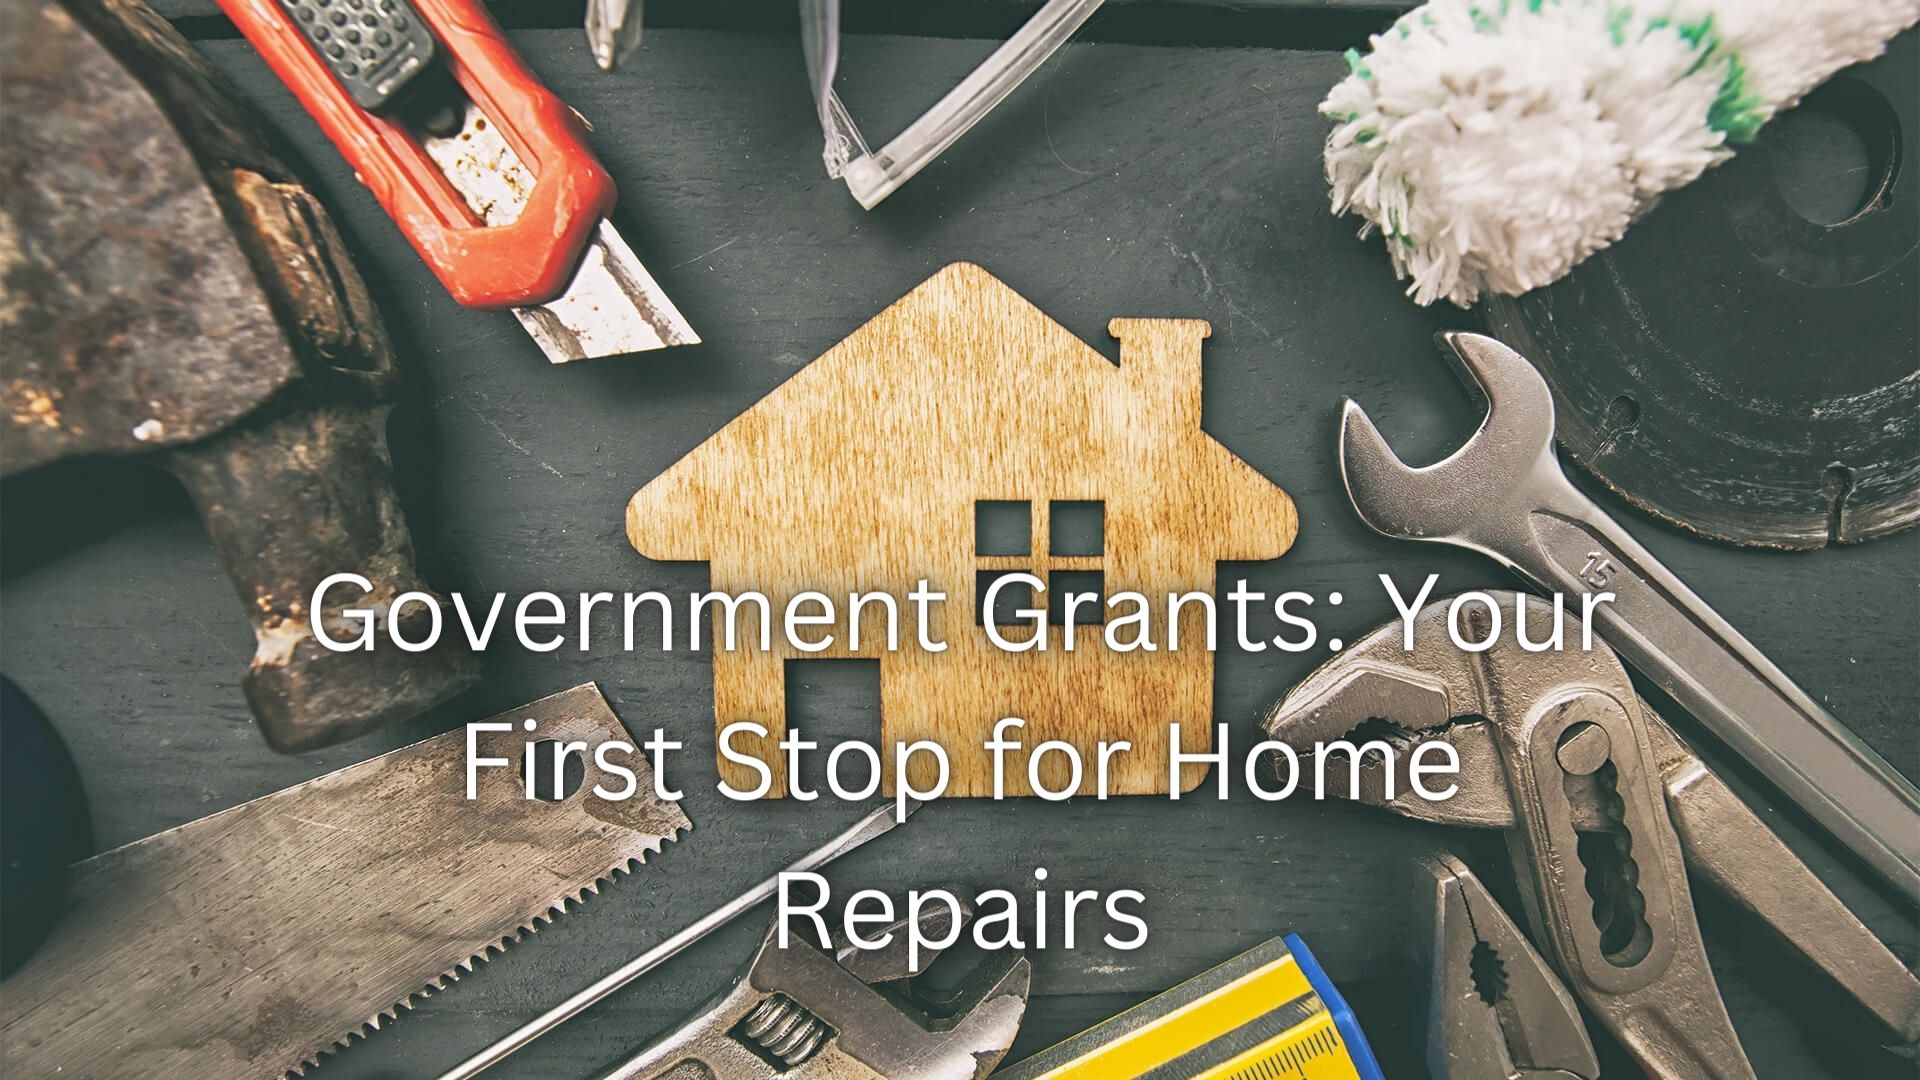 Government Grants Your First Stop for Home Repairs.